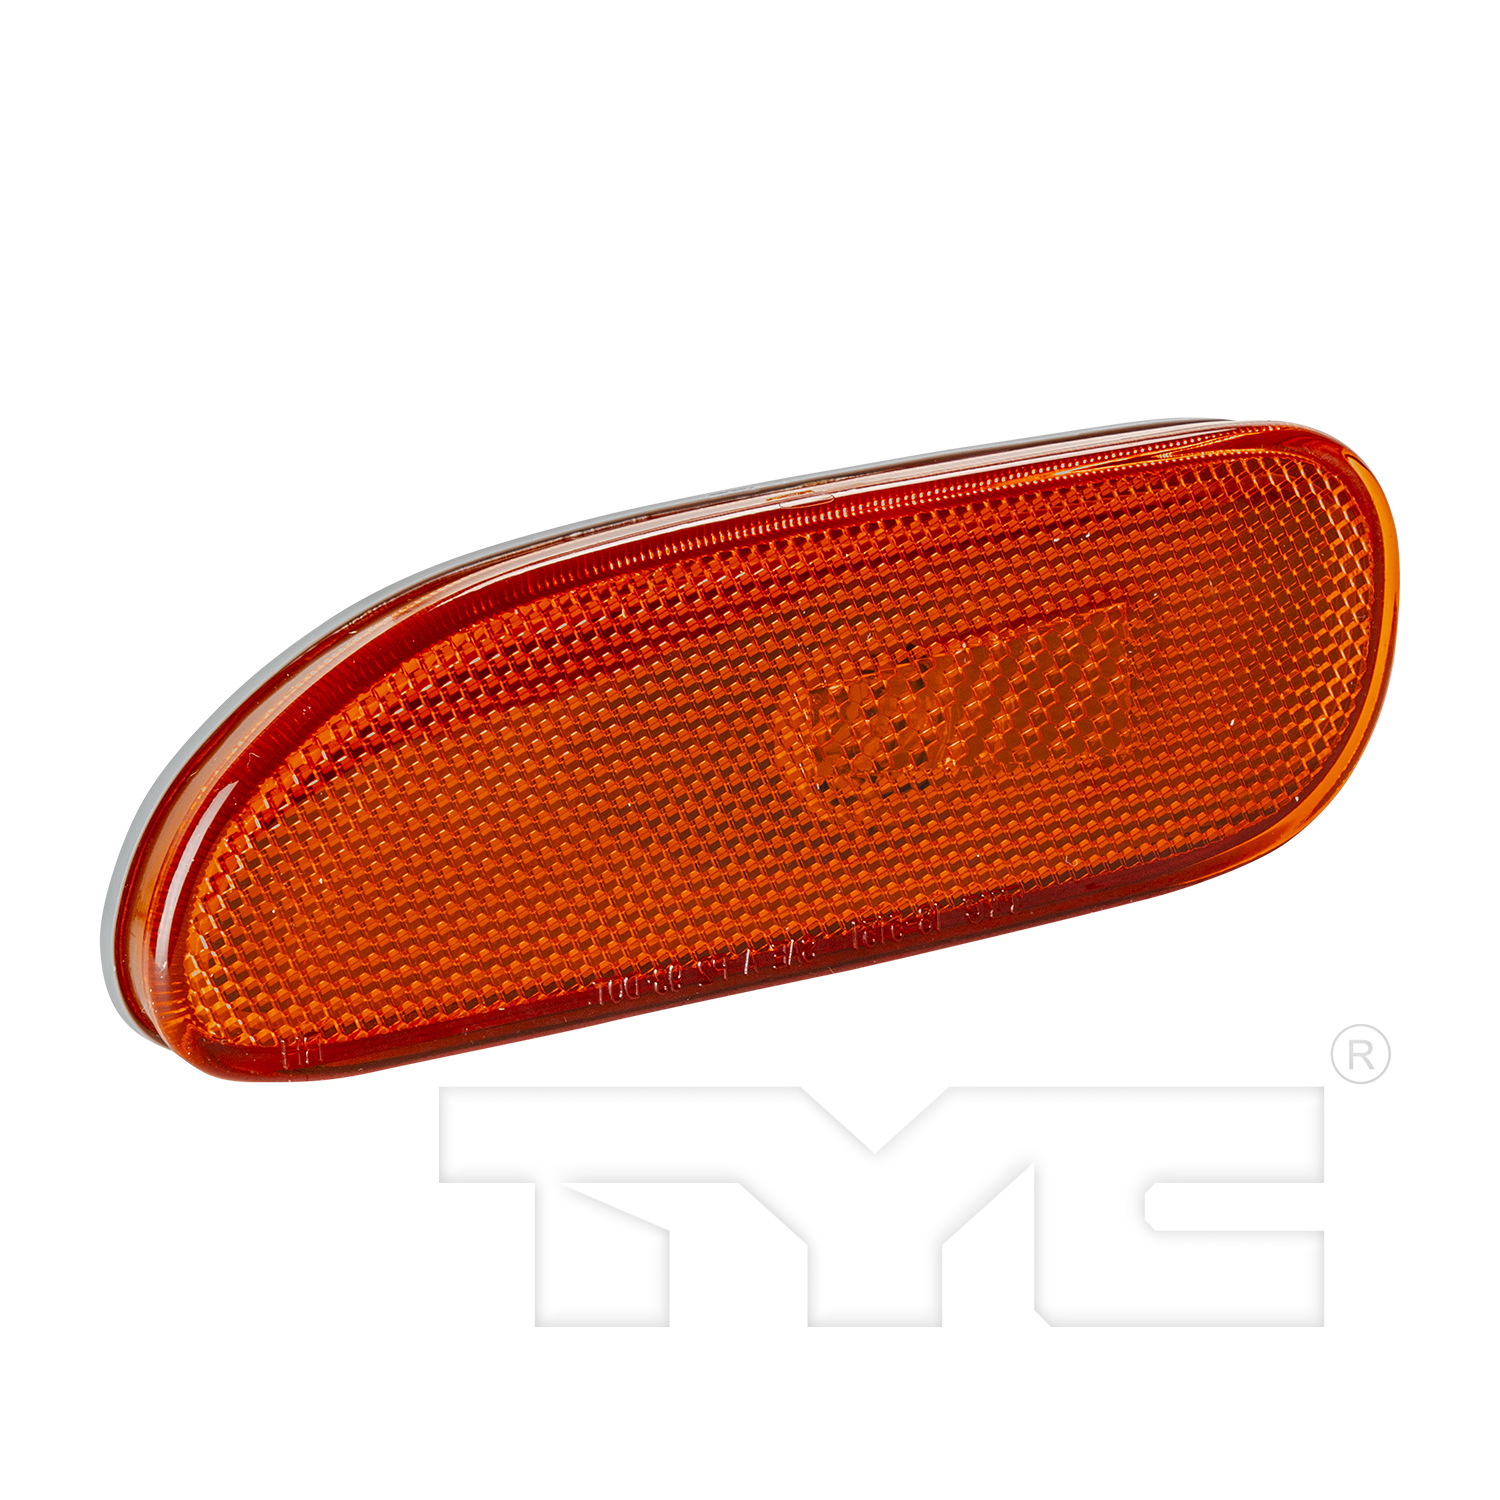 Aftermarket LAMPS for MITSUBISHI - ECLIPSE, ECLIPSE,95-99,LT Front marker lamp assy